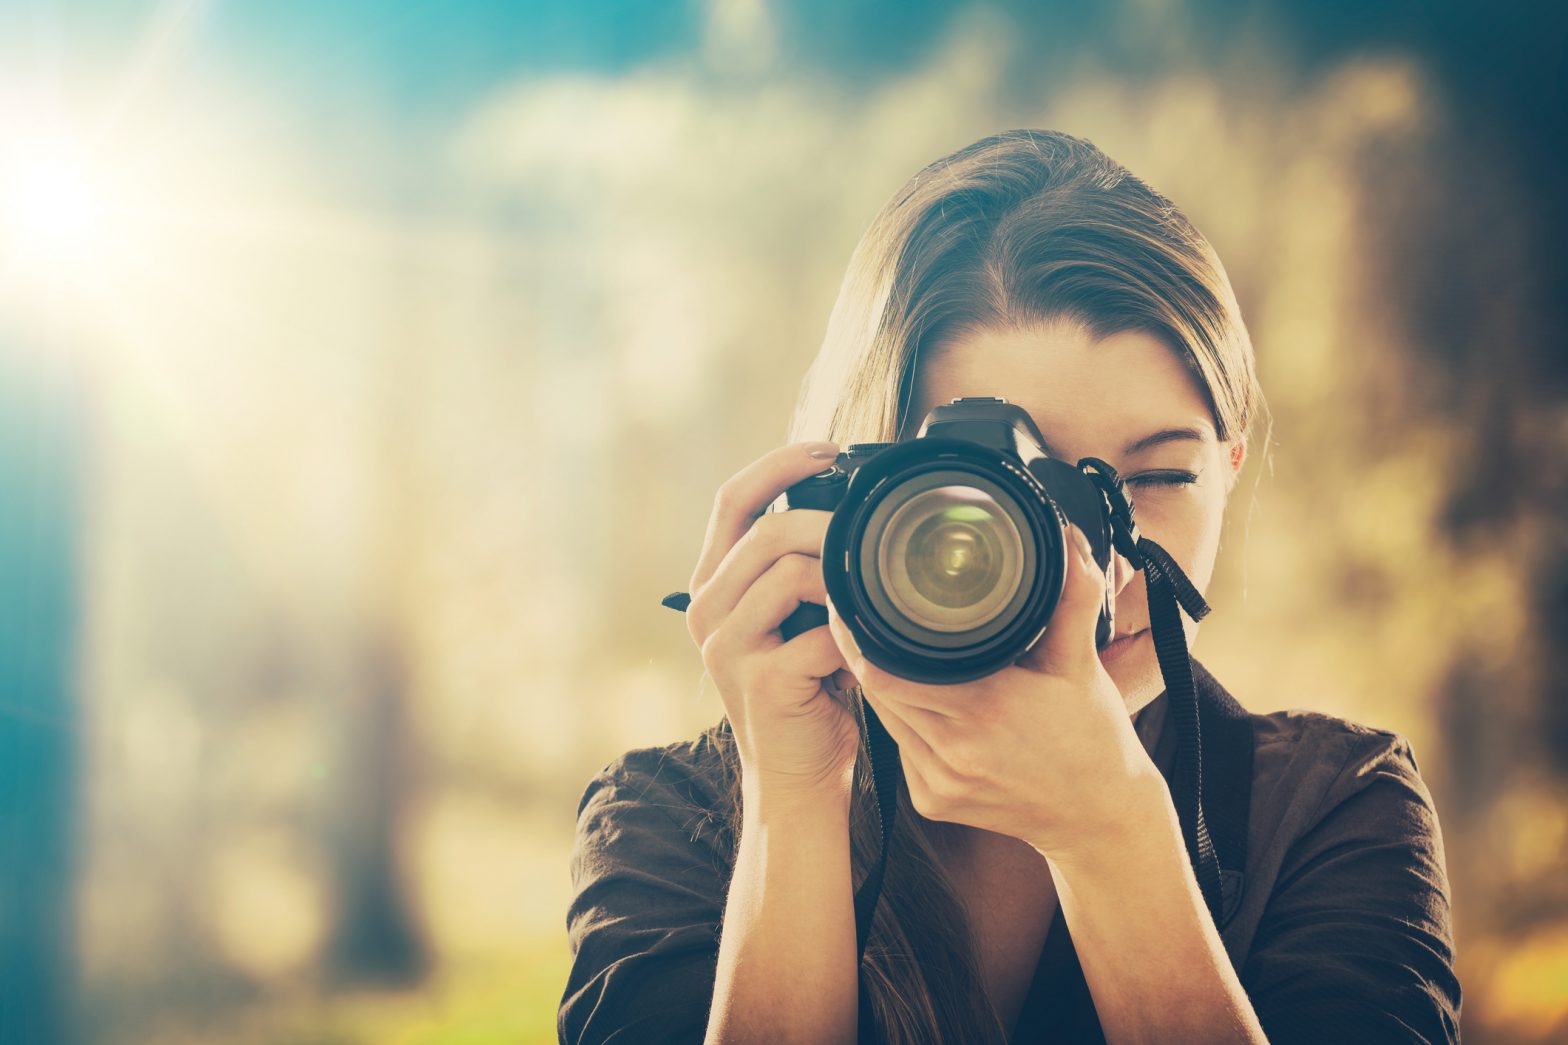 Should You Use Stock Images in Your Content Marketing Efforts?